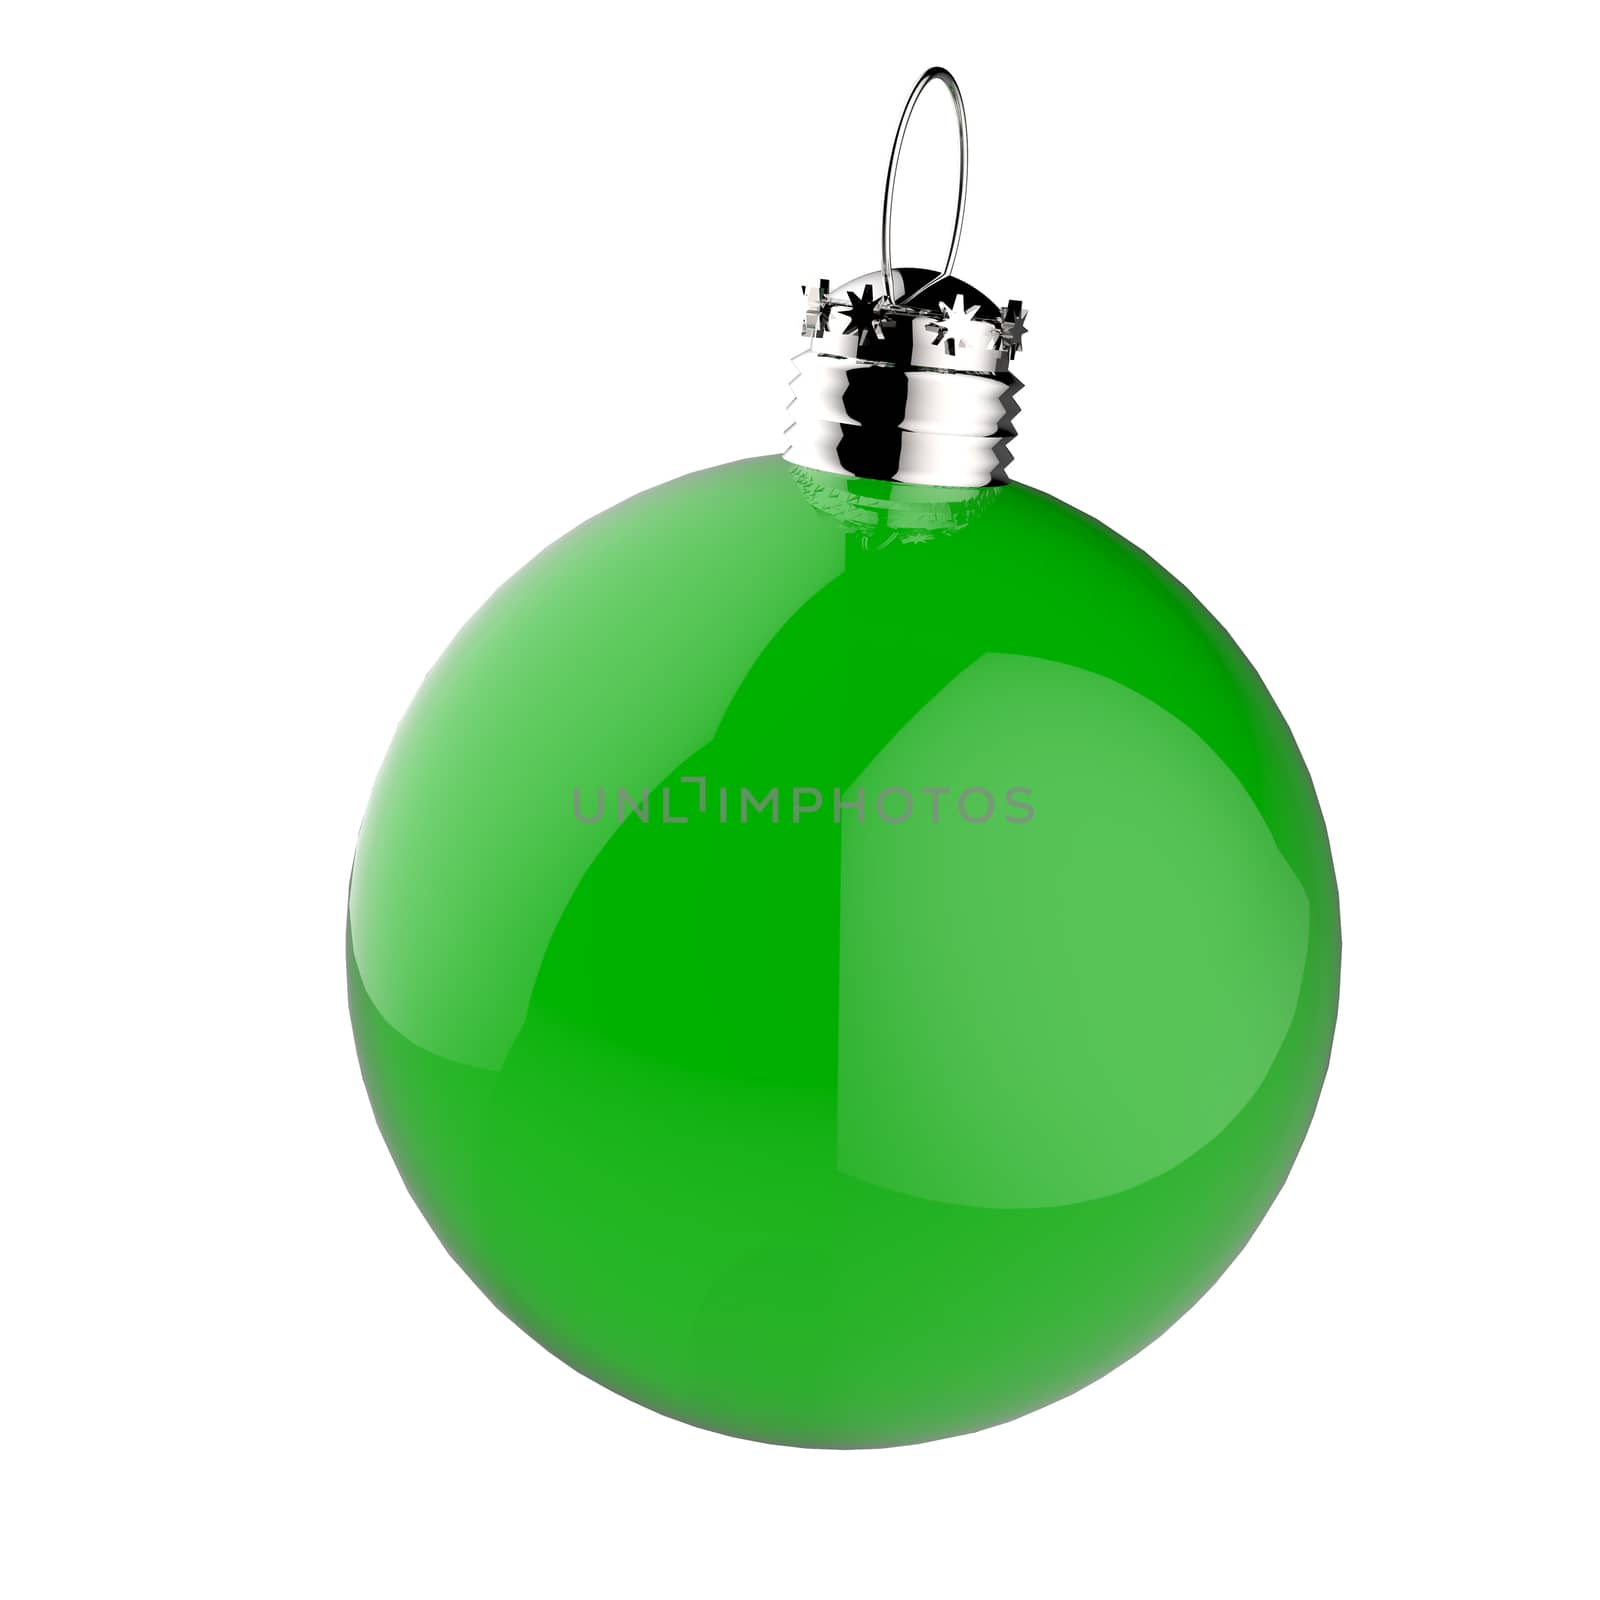 Empty Christmas ornament by everythingpossible